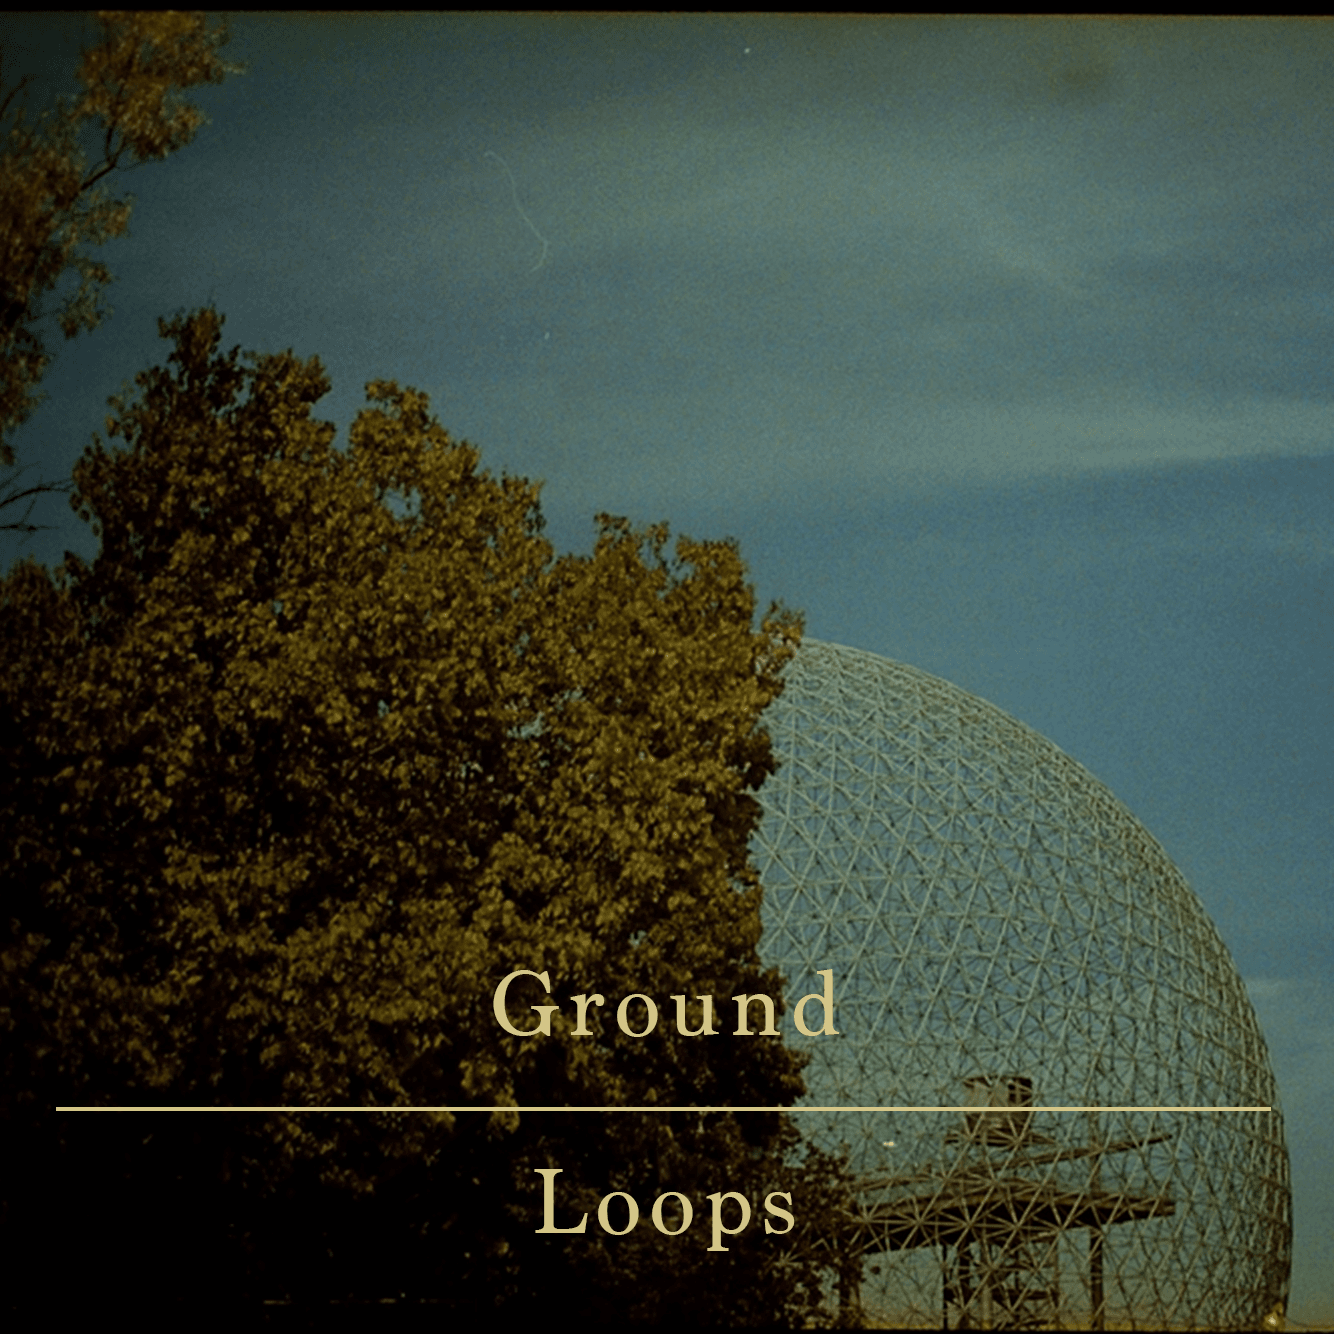 the artwork for the album Ground Loops